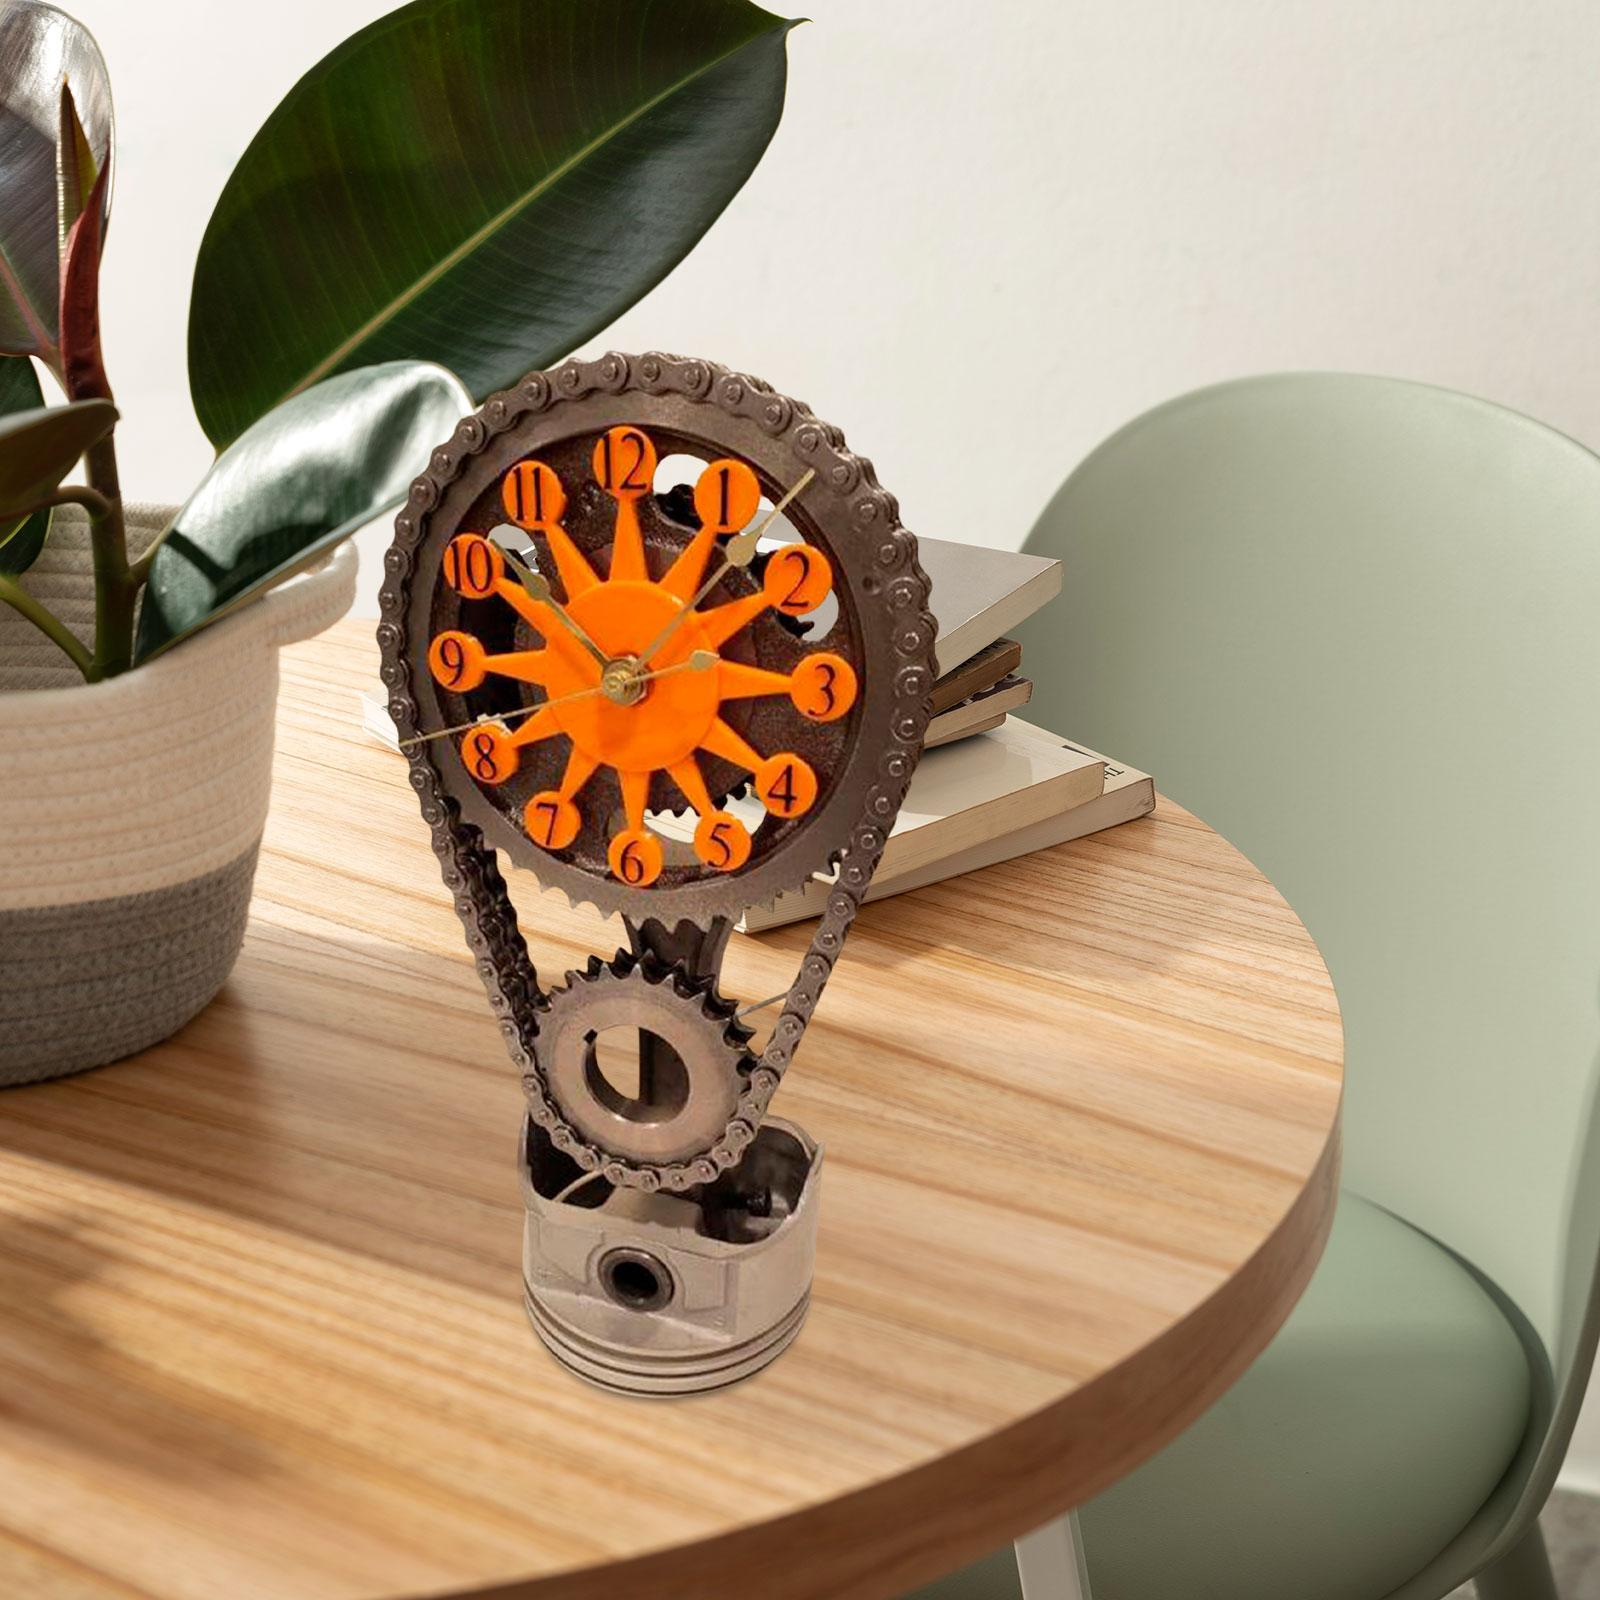 Rotating Gear Clock Fashion Metal Unique Table Clock for Home Office Bedroom